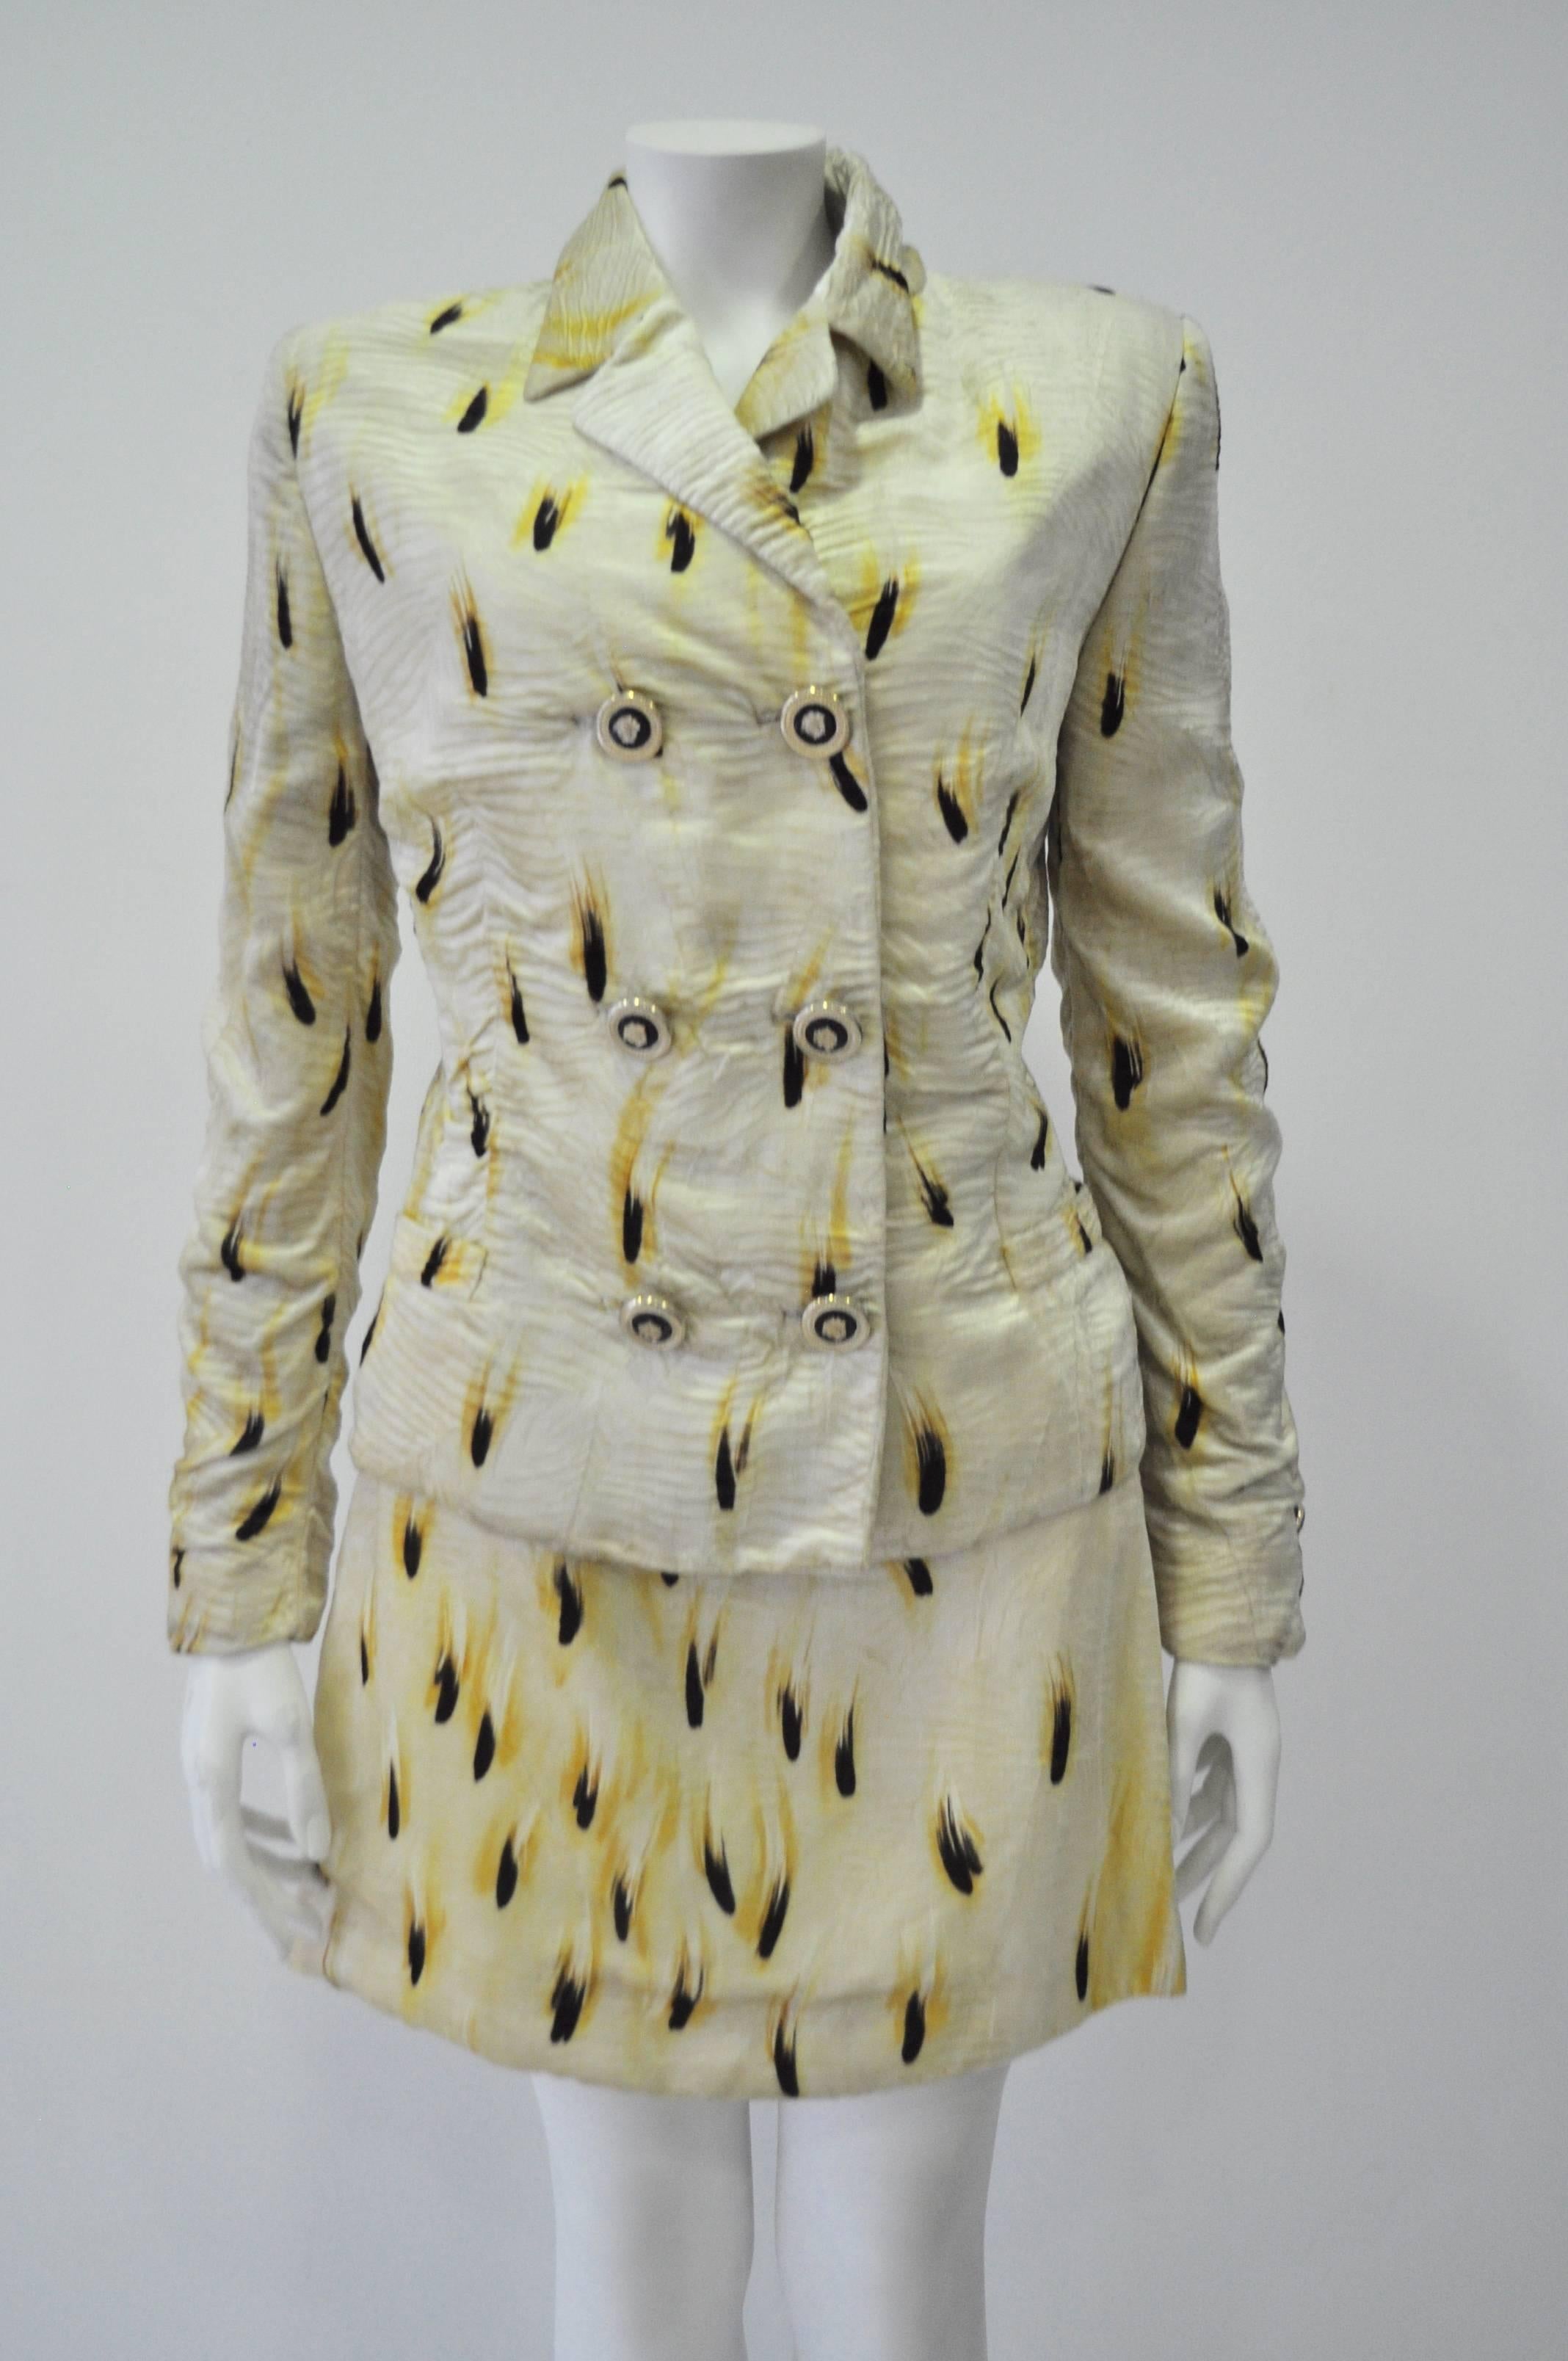 Highly Original Gianni Versace Couture Abstract Plume Print Crushed Velvet Skirt Suit, Fall 1994